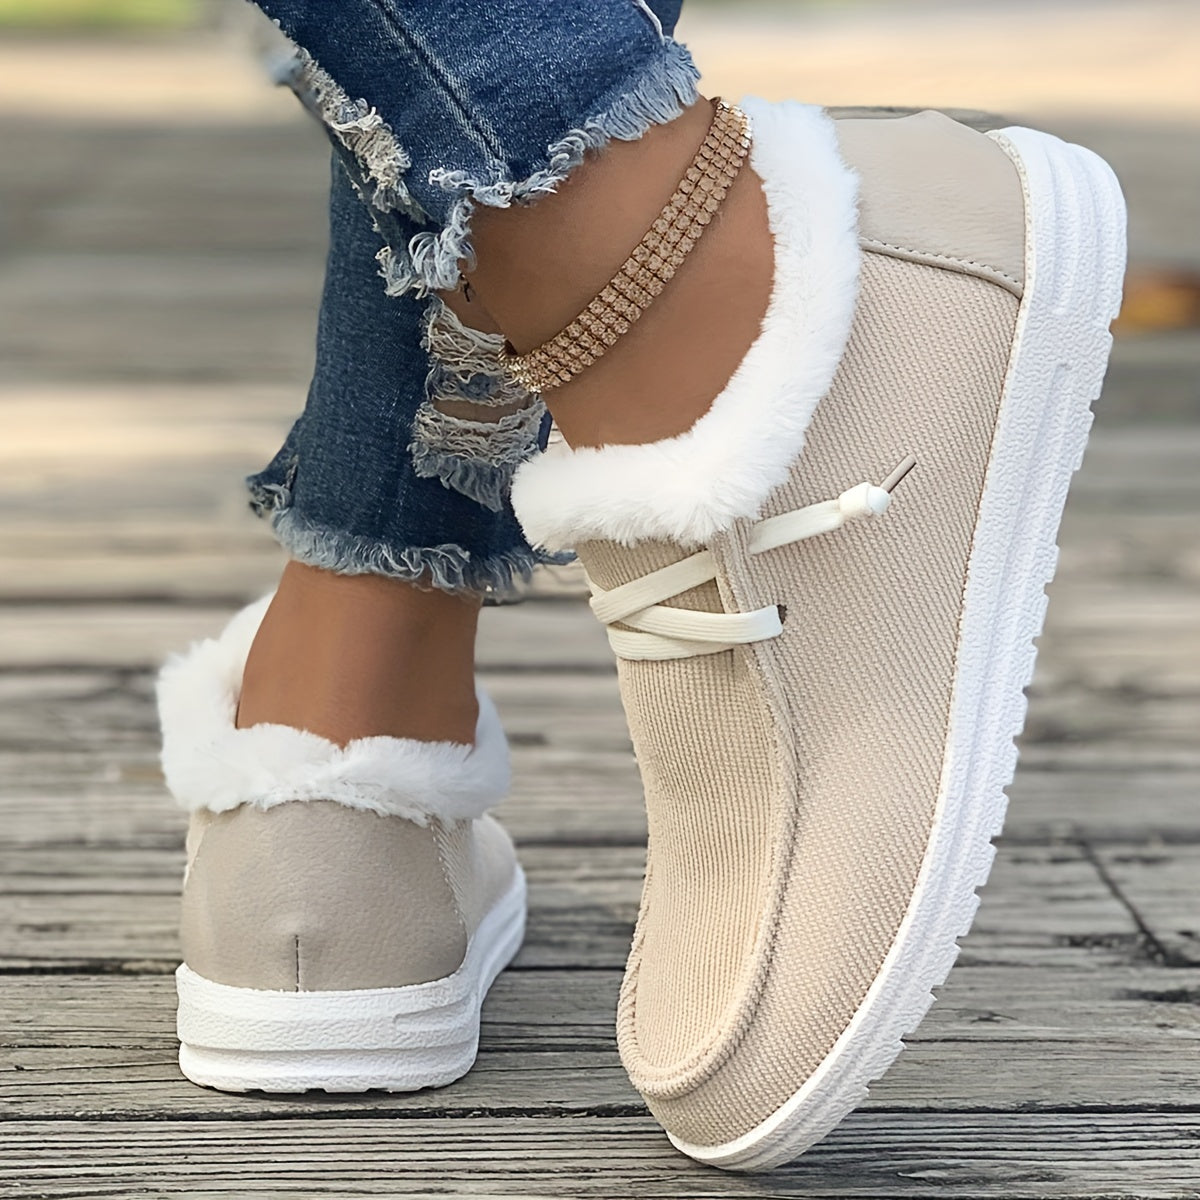 Women's Simple Canvas Shoes, Casual Lace Up Plush Lined Shoes, Lightweight Low Top Sneakers